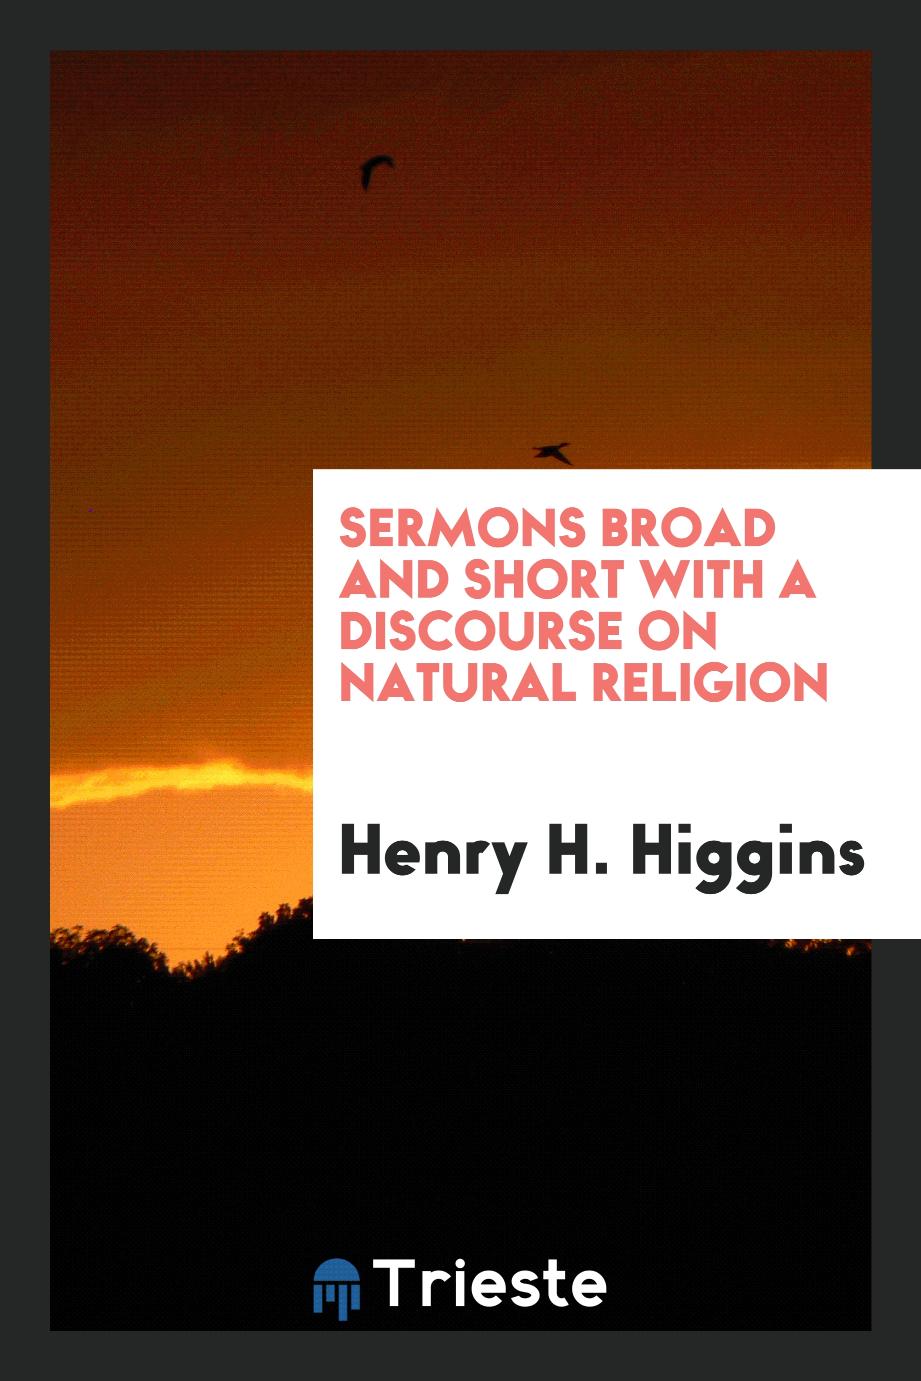 Sermons Broad and Short with a Discourse on Natural Religion